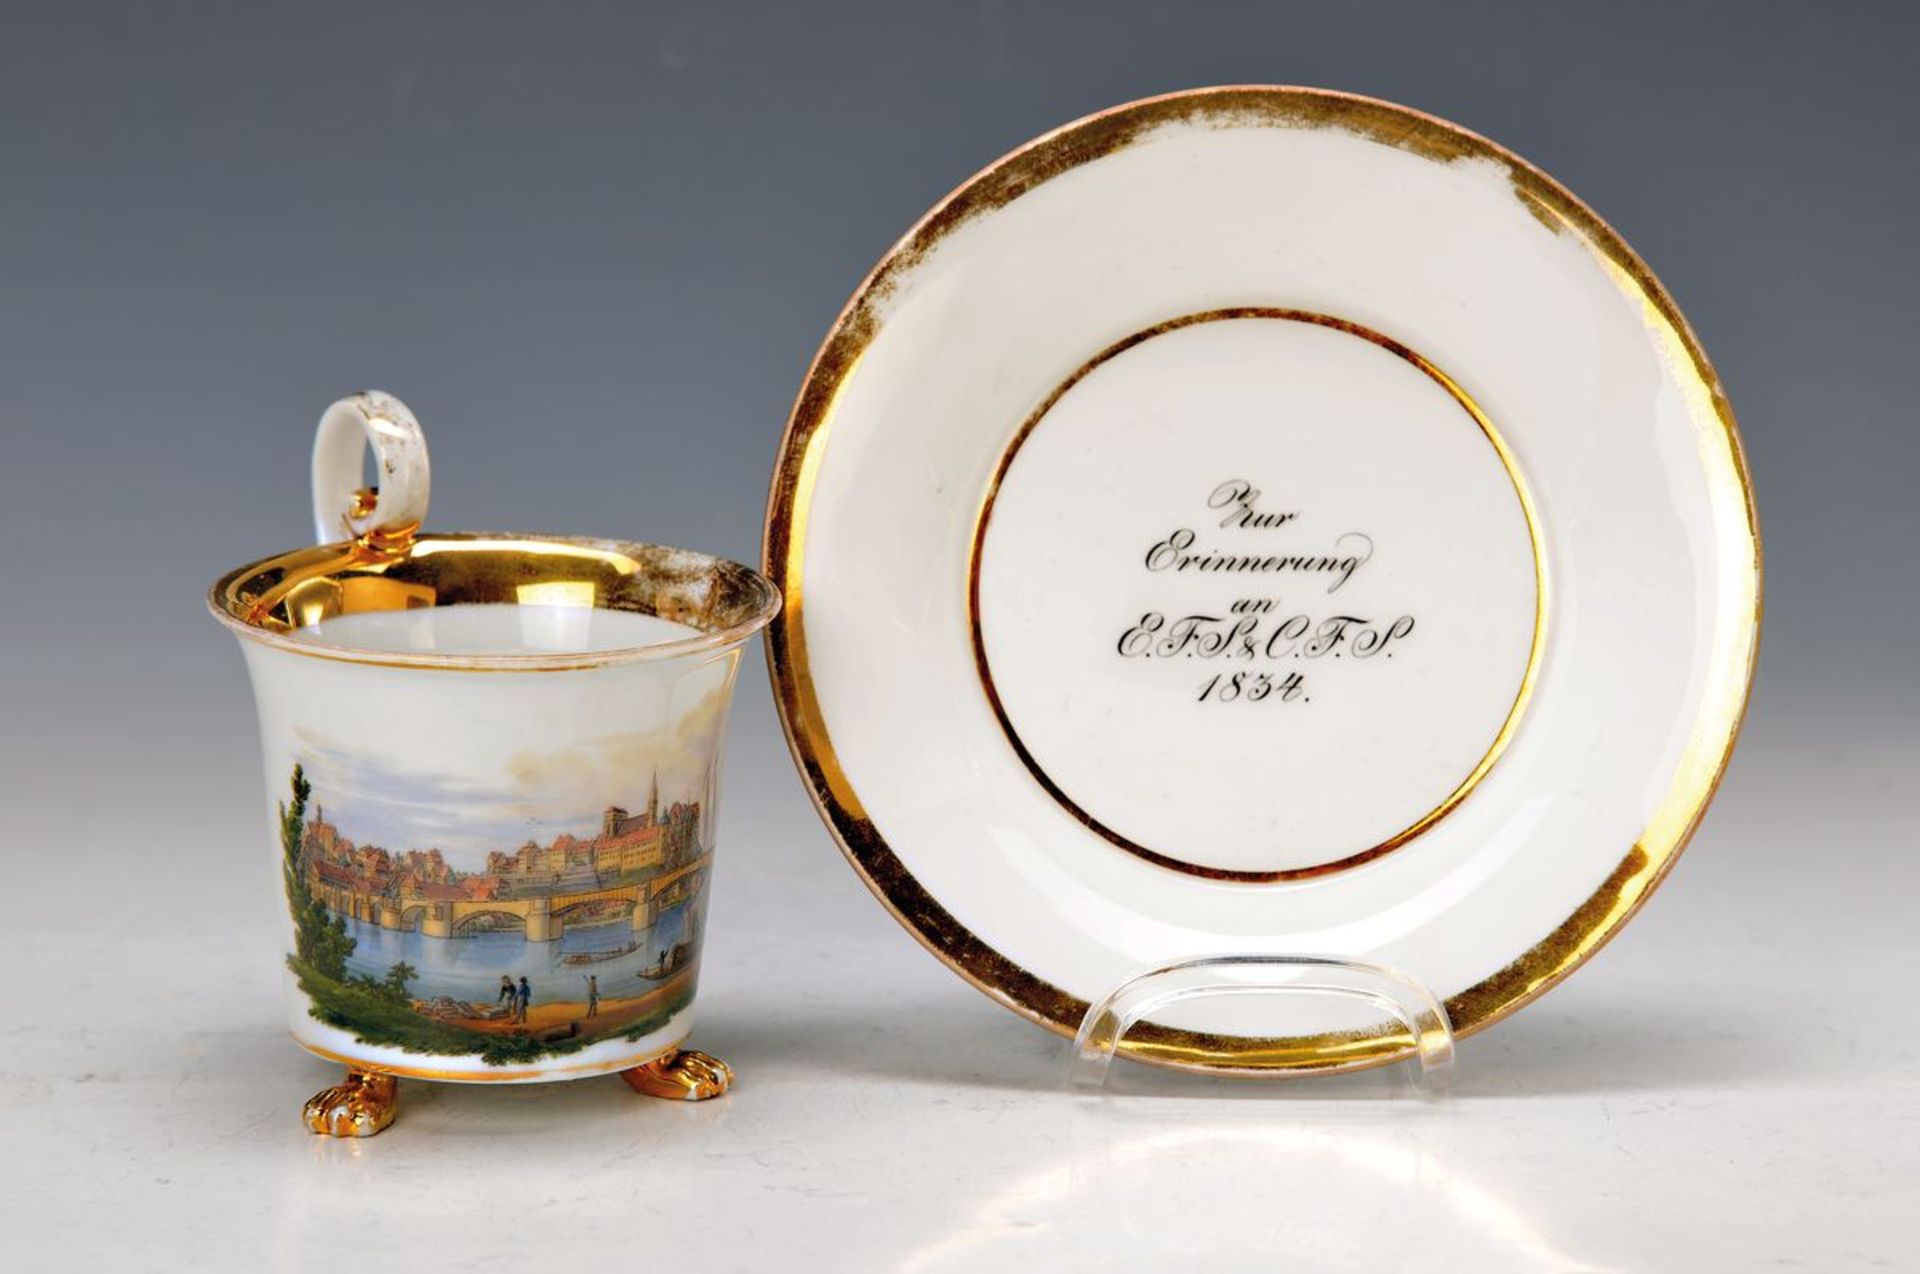 Biedermeier cup, Meissen, dat. 1834, view of Meissen, lithographed and painted, gilding abraded,